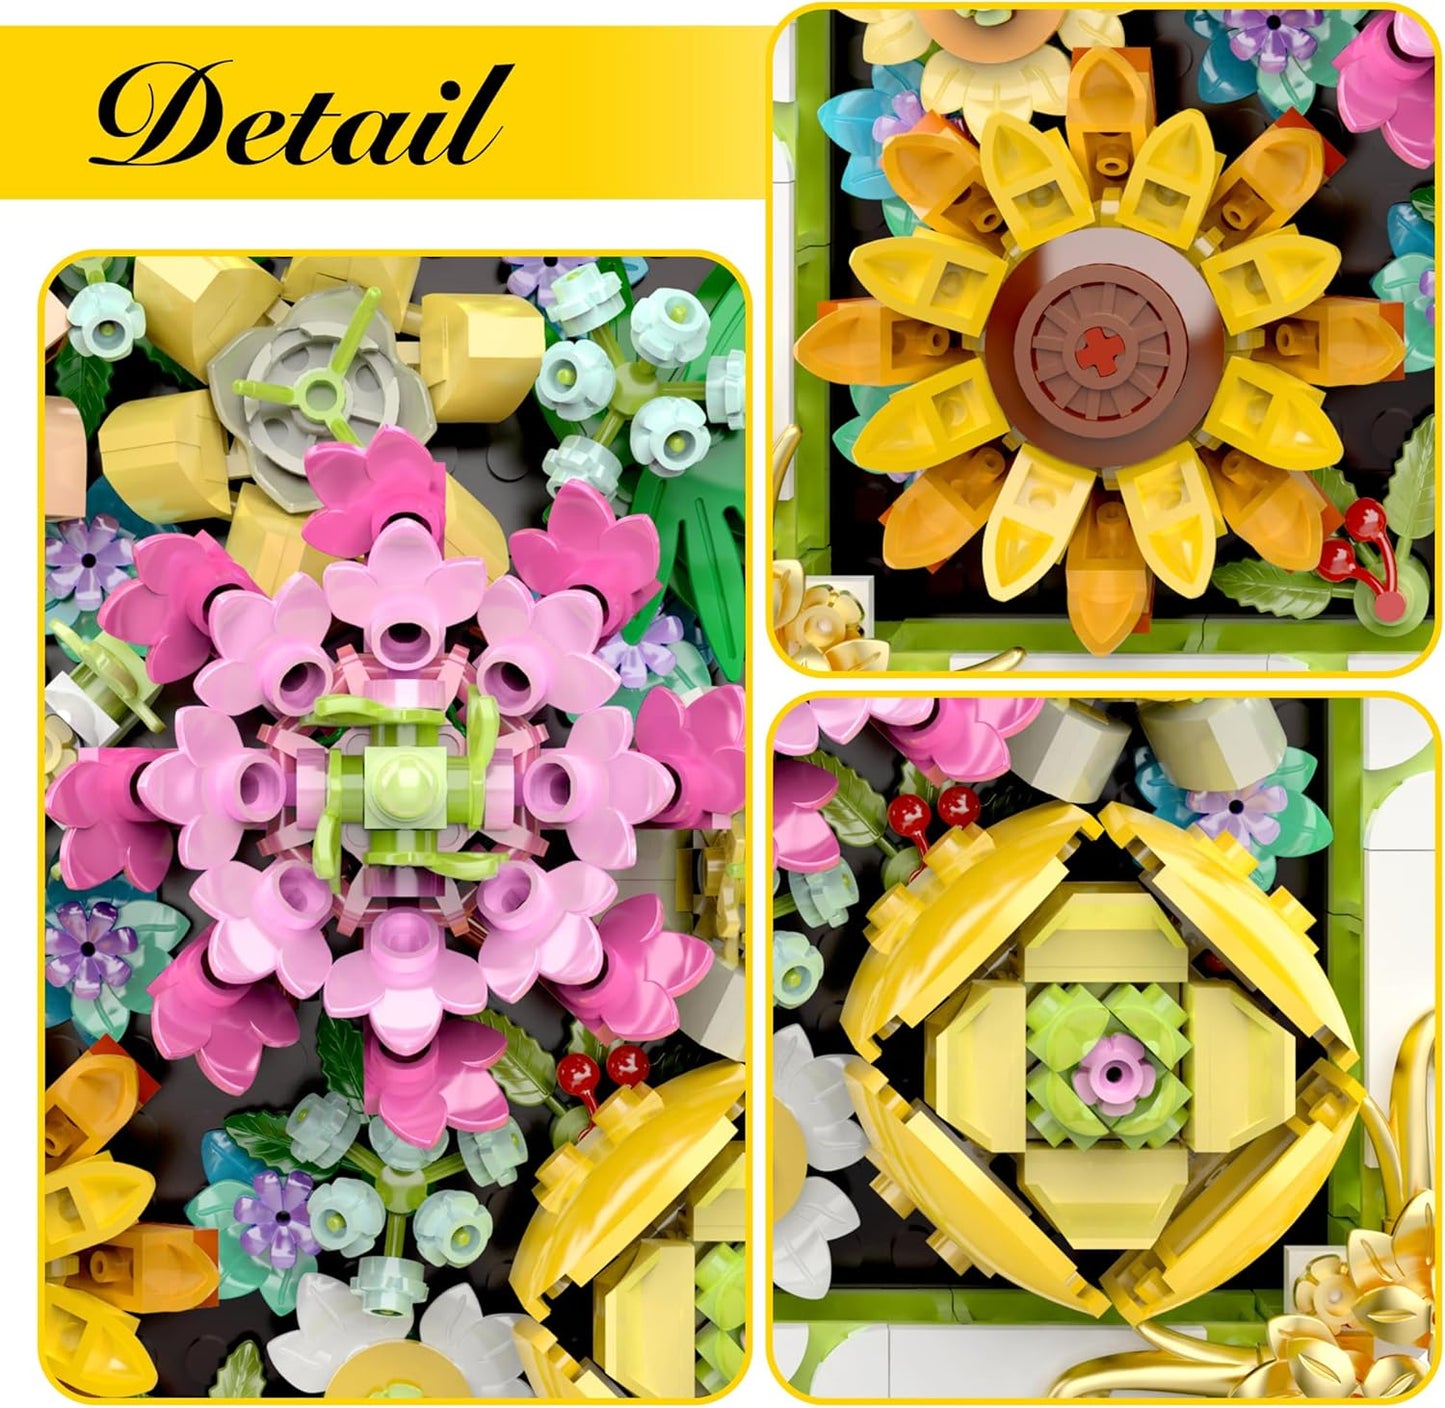 Under the Baubles Flowers Frame Toys Building Sets, Gift for Her or Him for Valentines Day Gift, Mother's Day, Birthday, Christmas, Botanical Collection Home Décor - 492PCS